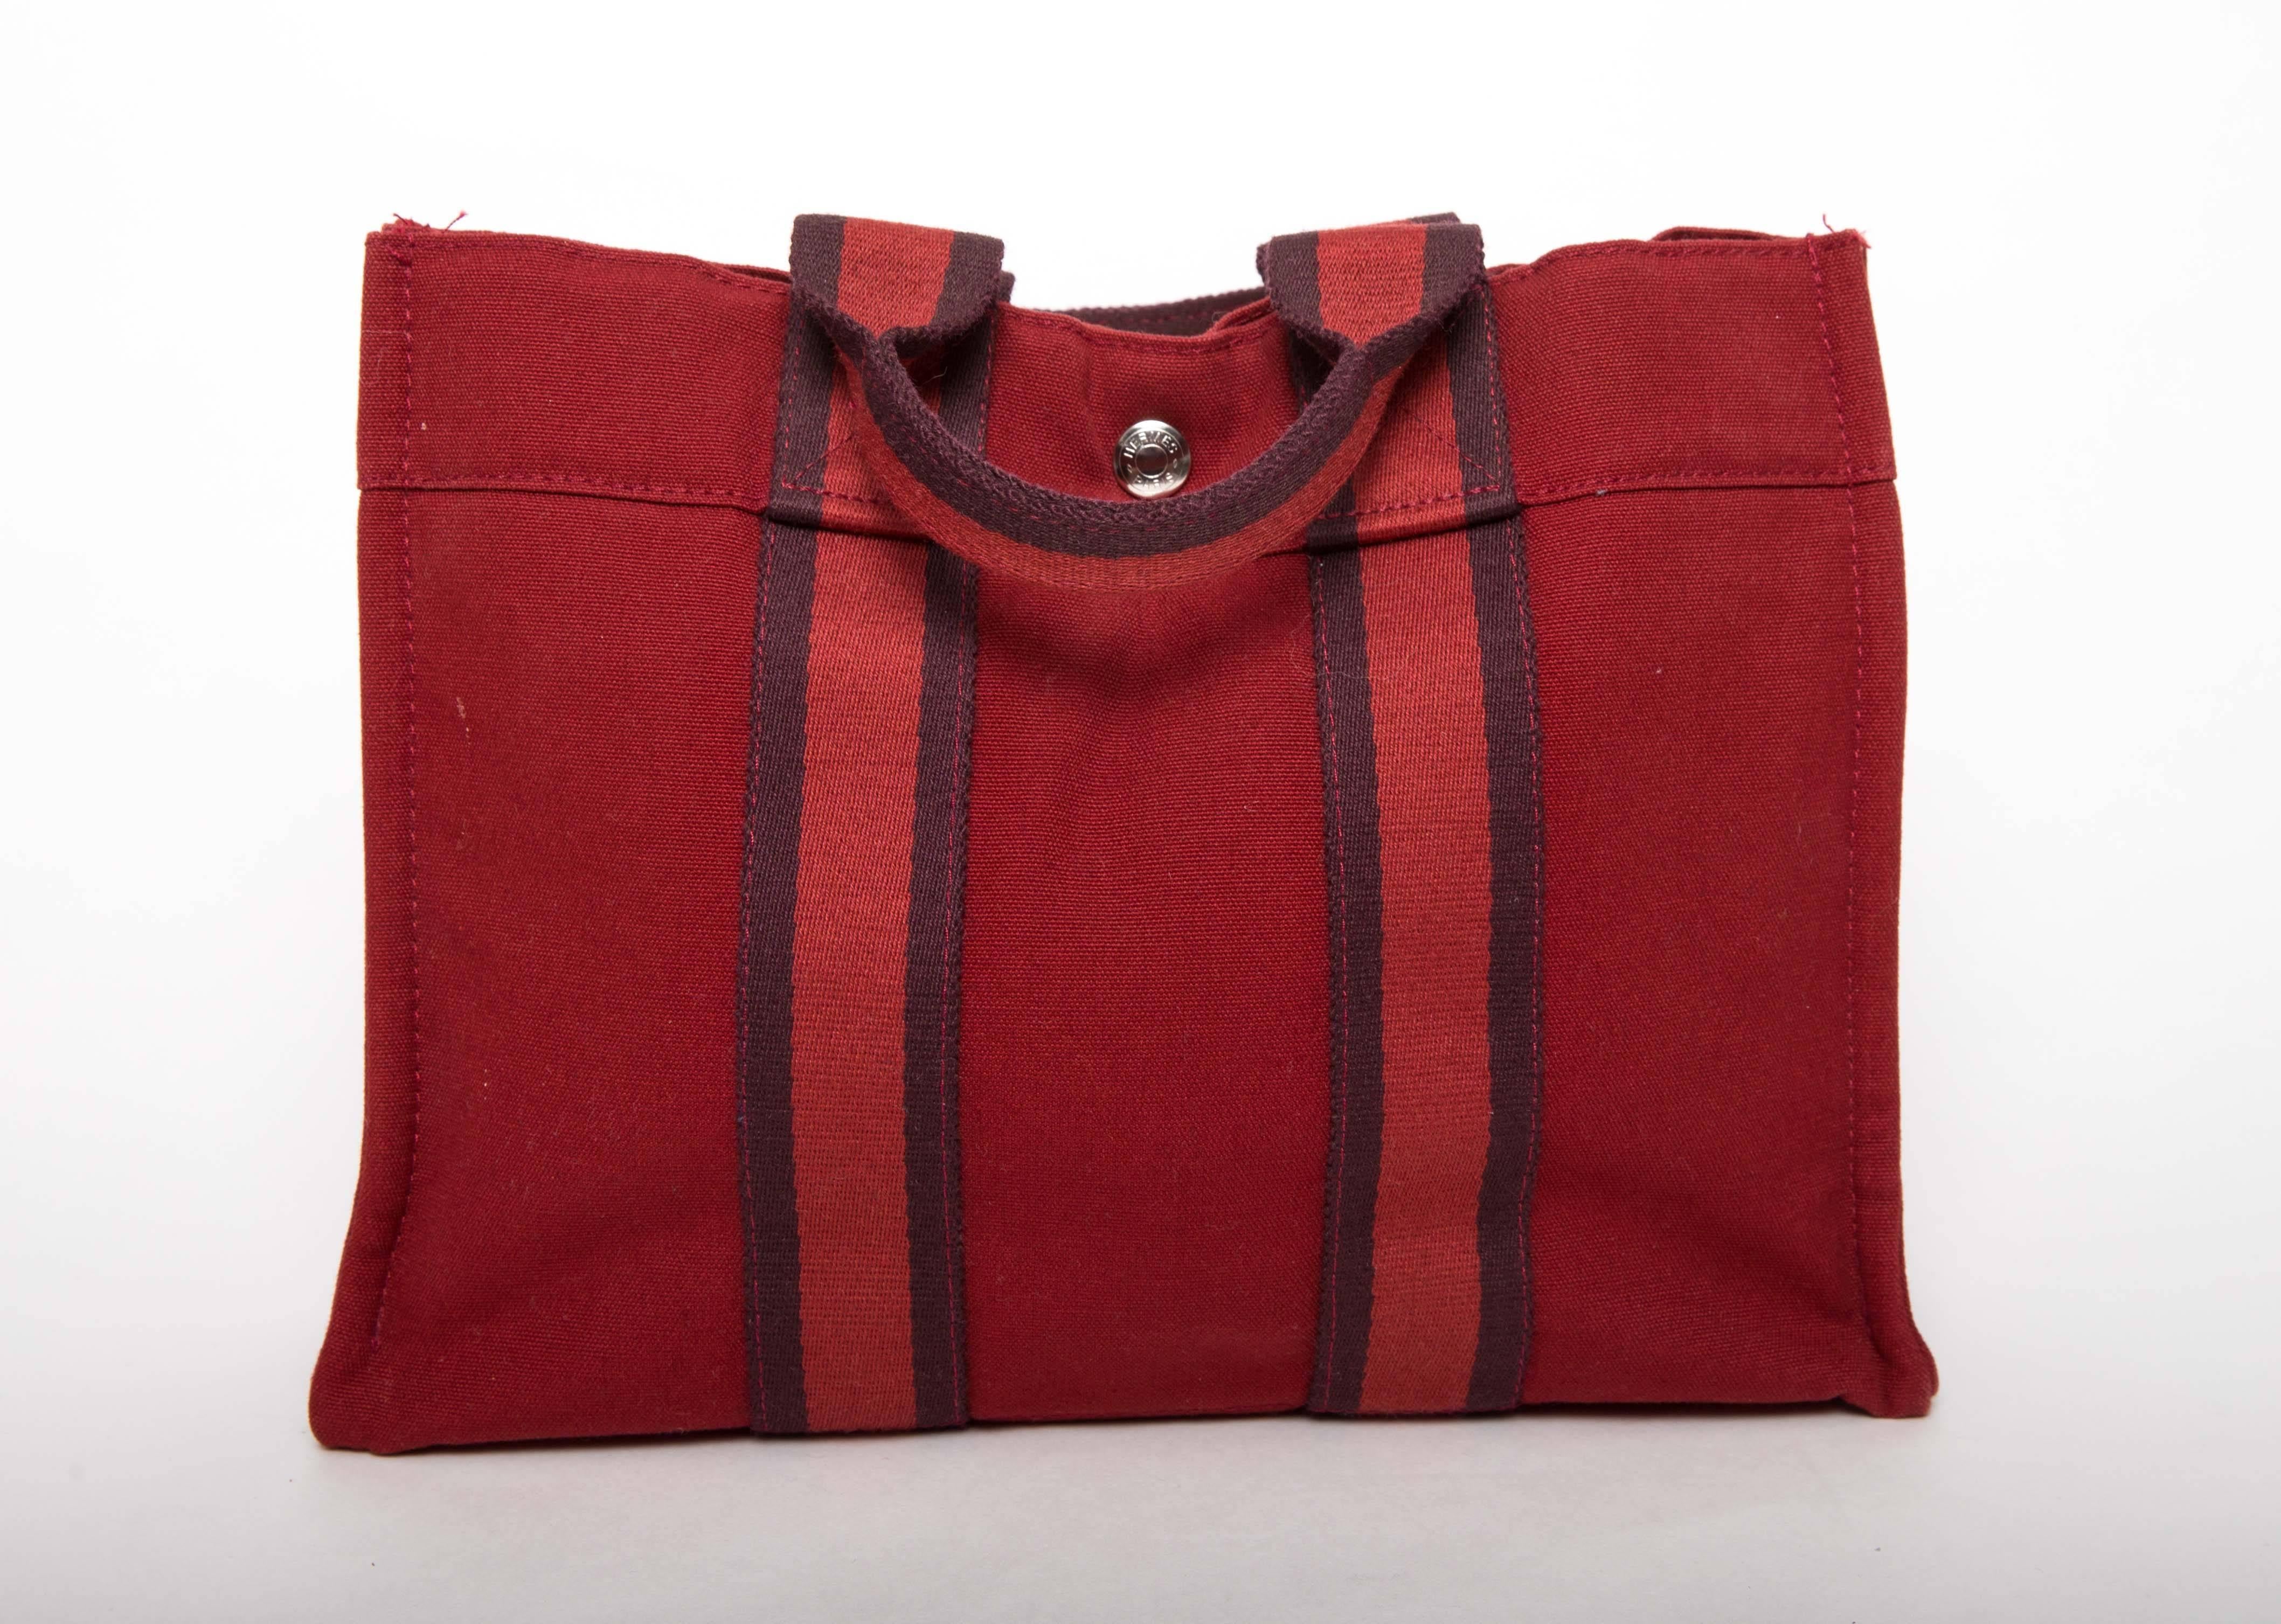 Hermes Navy Red and Navy Canvas Fourre Tout PM Tote Bag features
snaps on both ends for expansion,double flat canvas handles, open top with middle snap closure, canvas lining, one interior zippered pocket, and palladium hardware. 
Does not come